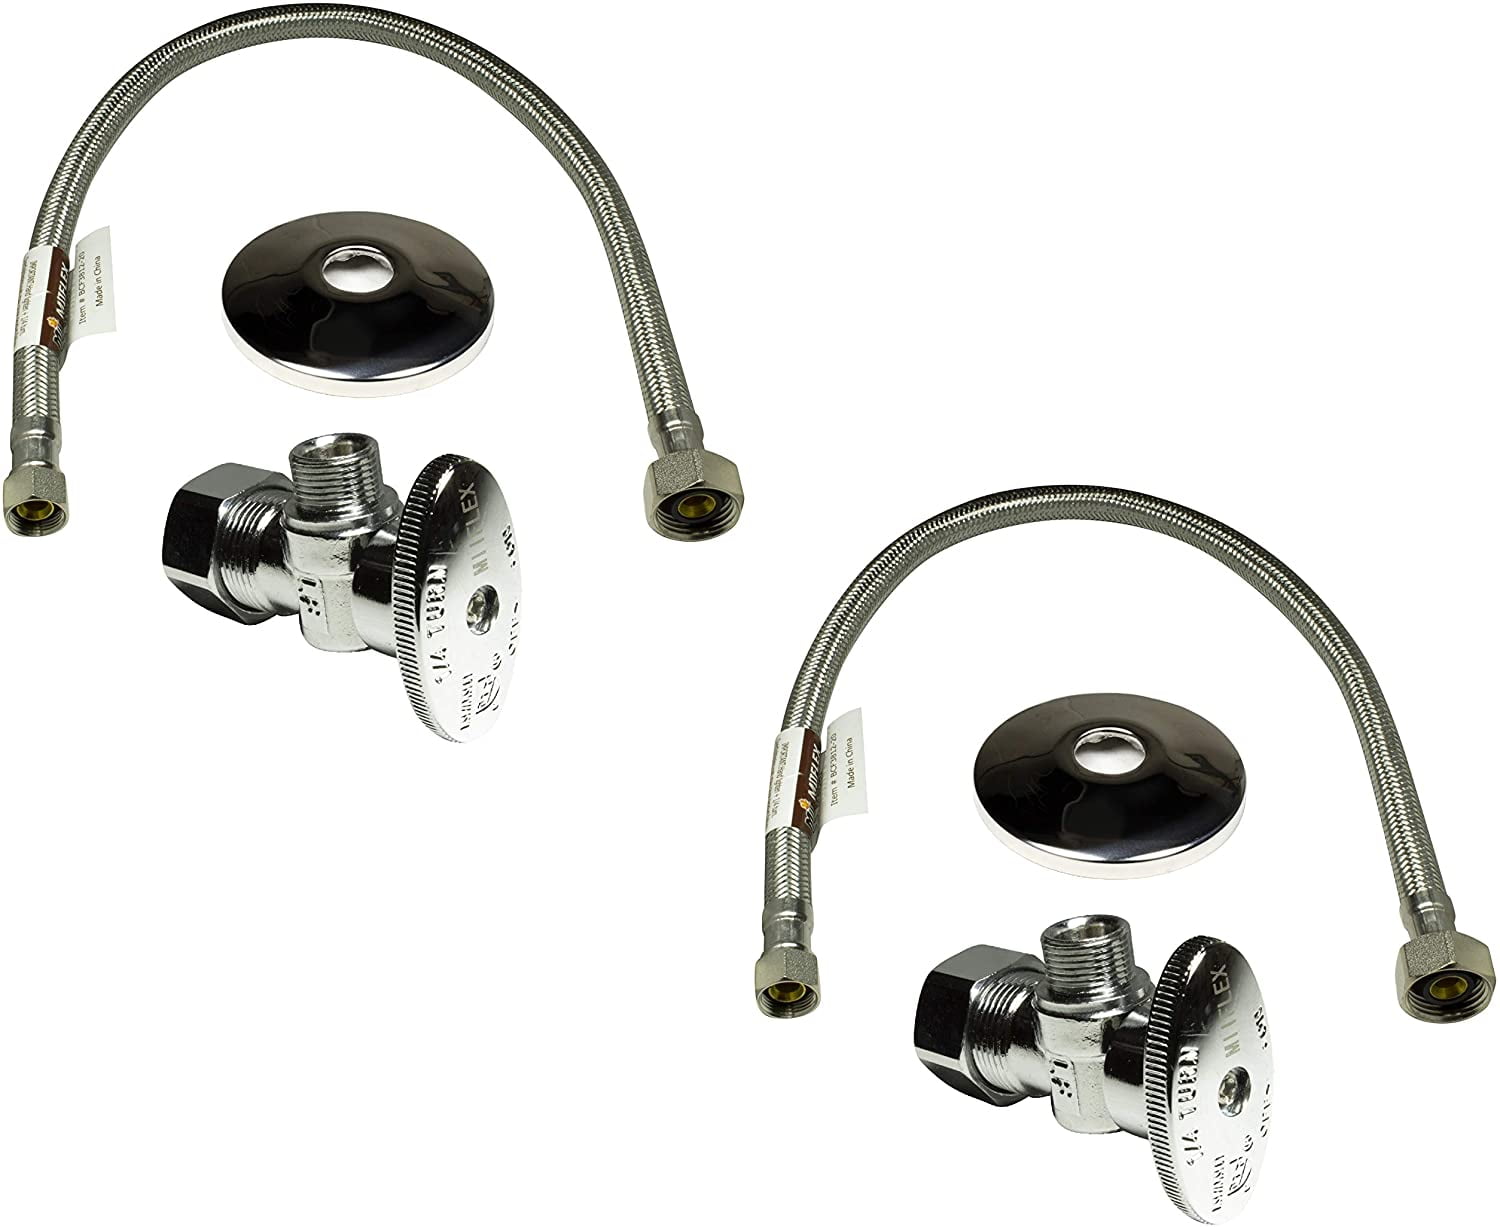 Cover Tube and Bell Escutcheon Kit Jaclo 621-4-71CT-SB 5/8 x 3/8 OD Compression Valve with Contemporary Cross Handle Satin Brass